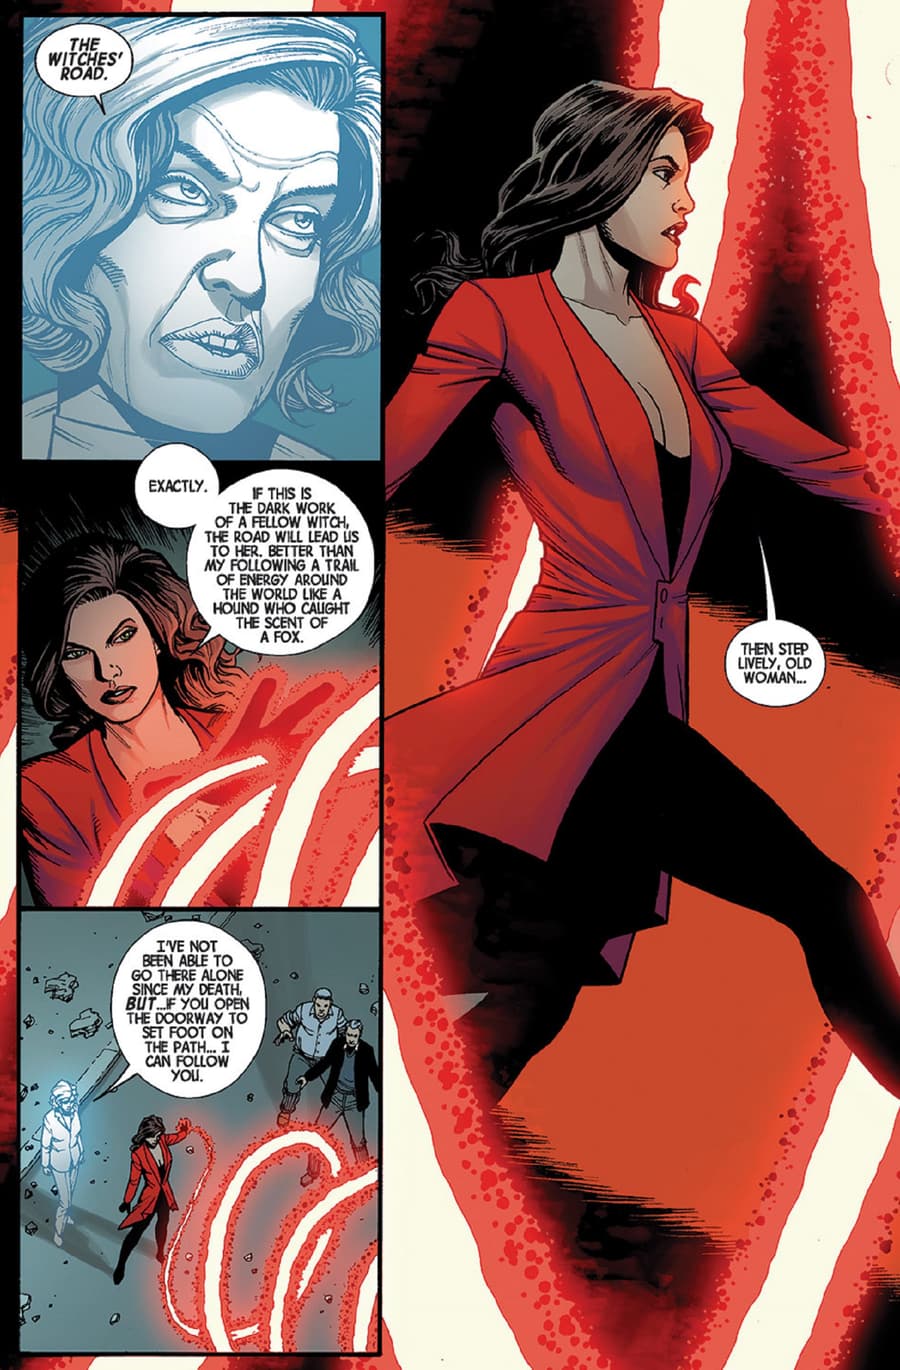 Scarlet Witch heads onto the Witches' Road!